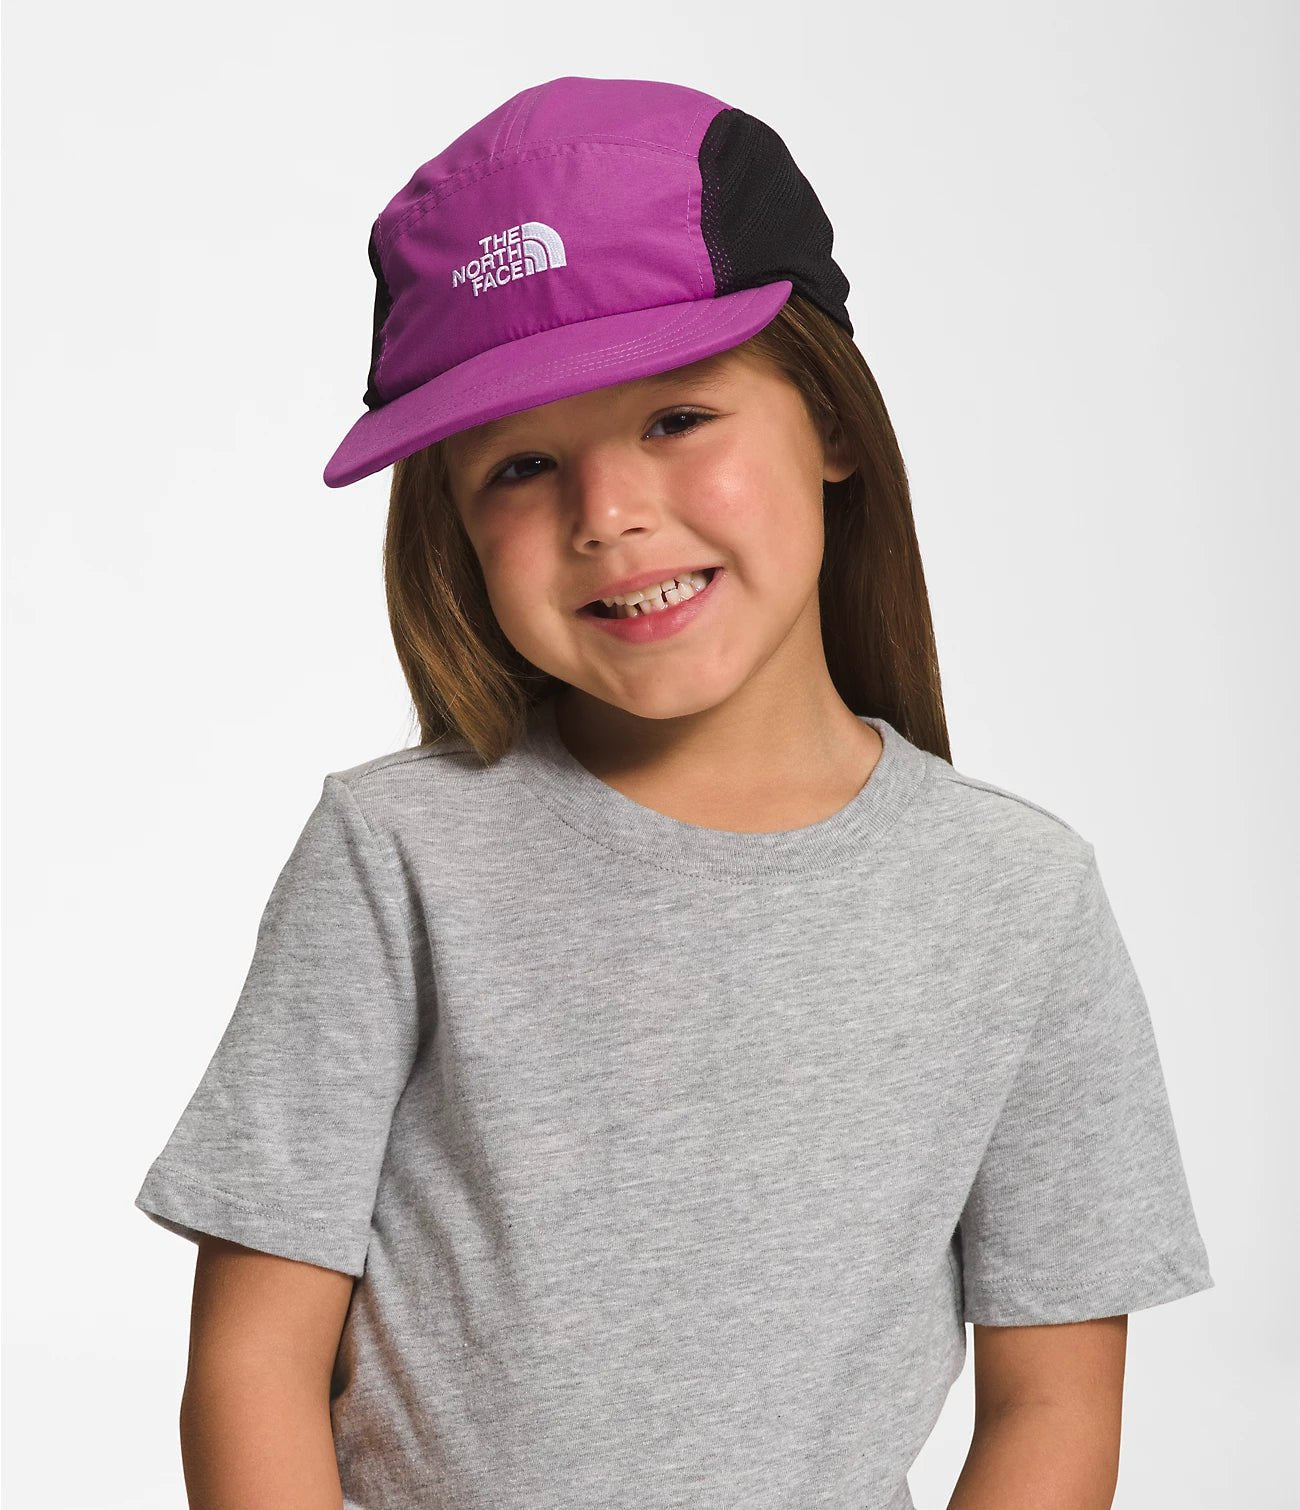 The North Face Kids' Class V Camp Hat - Mountain Kids Outfitters: Purple Cactus Flower Color front view